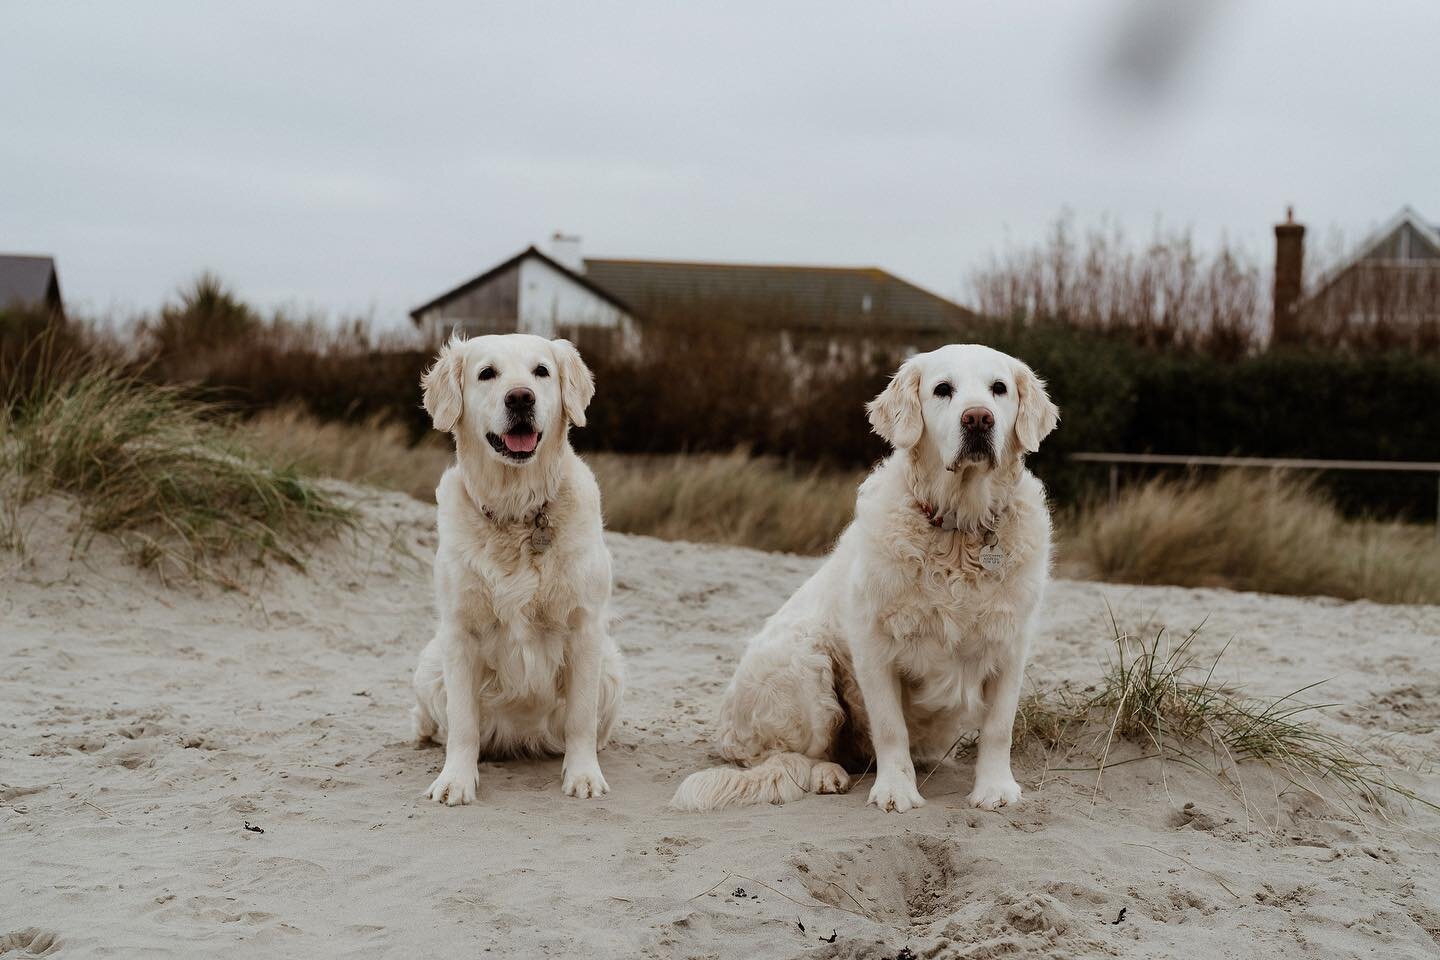 Meet @lolathegoldenbear and Poppy, the two most important members of the team. 

Most likely to be found sleeping on the job or sniffing out food. 

#officedogs #socialmediteam #teamdog #caninecompanions  #socialmediaservices #socialmediasussex